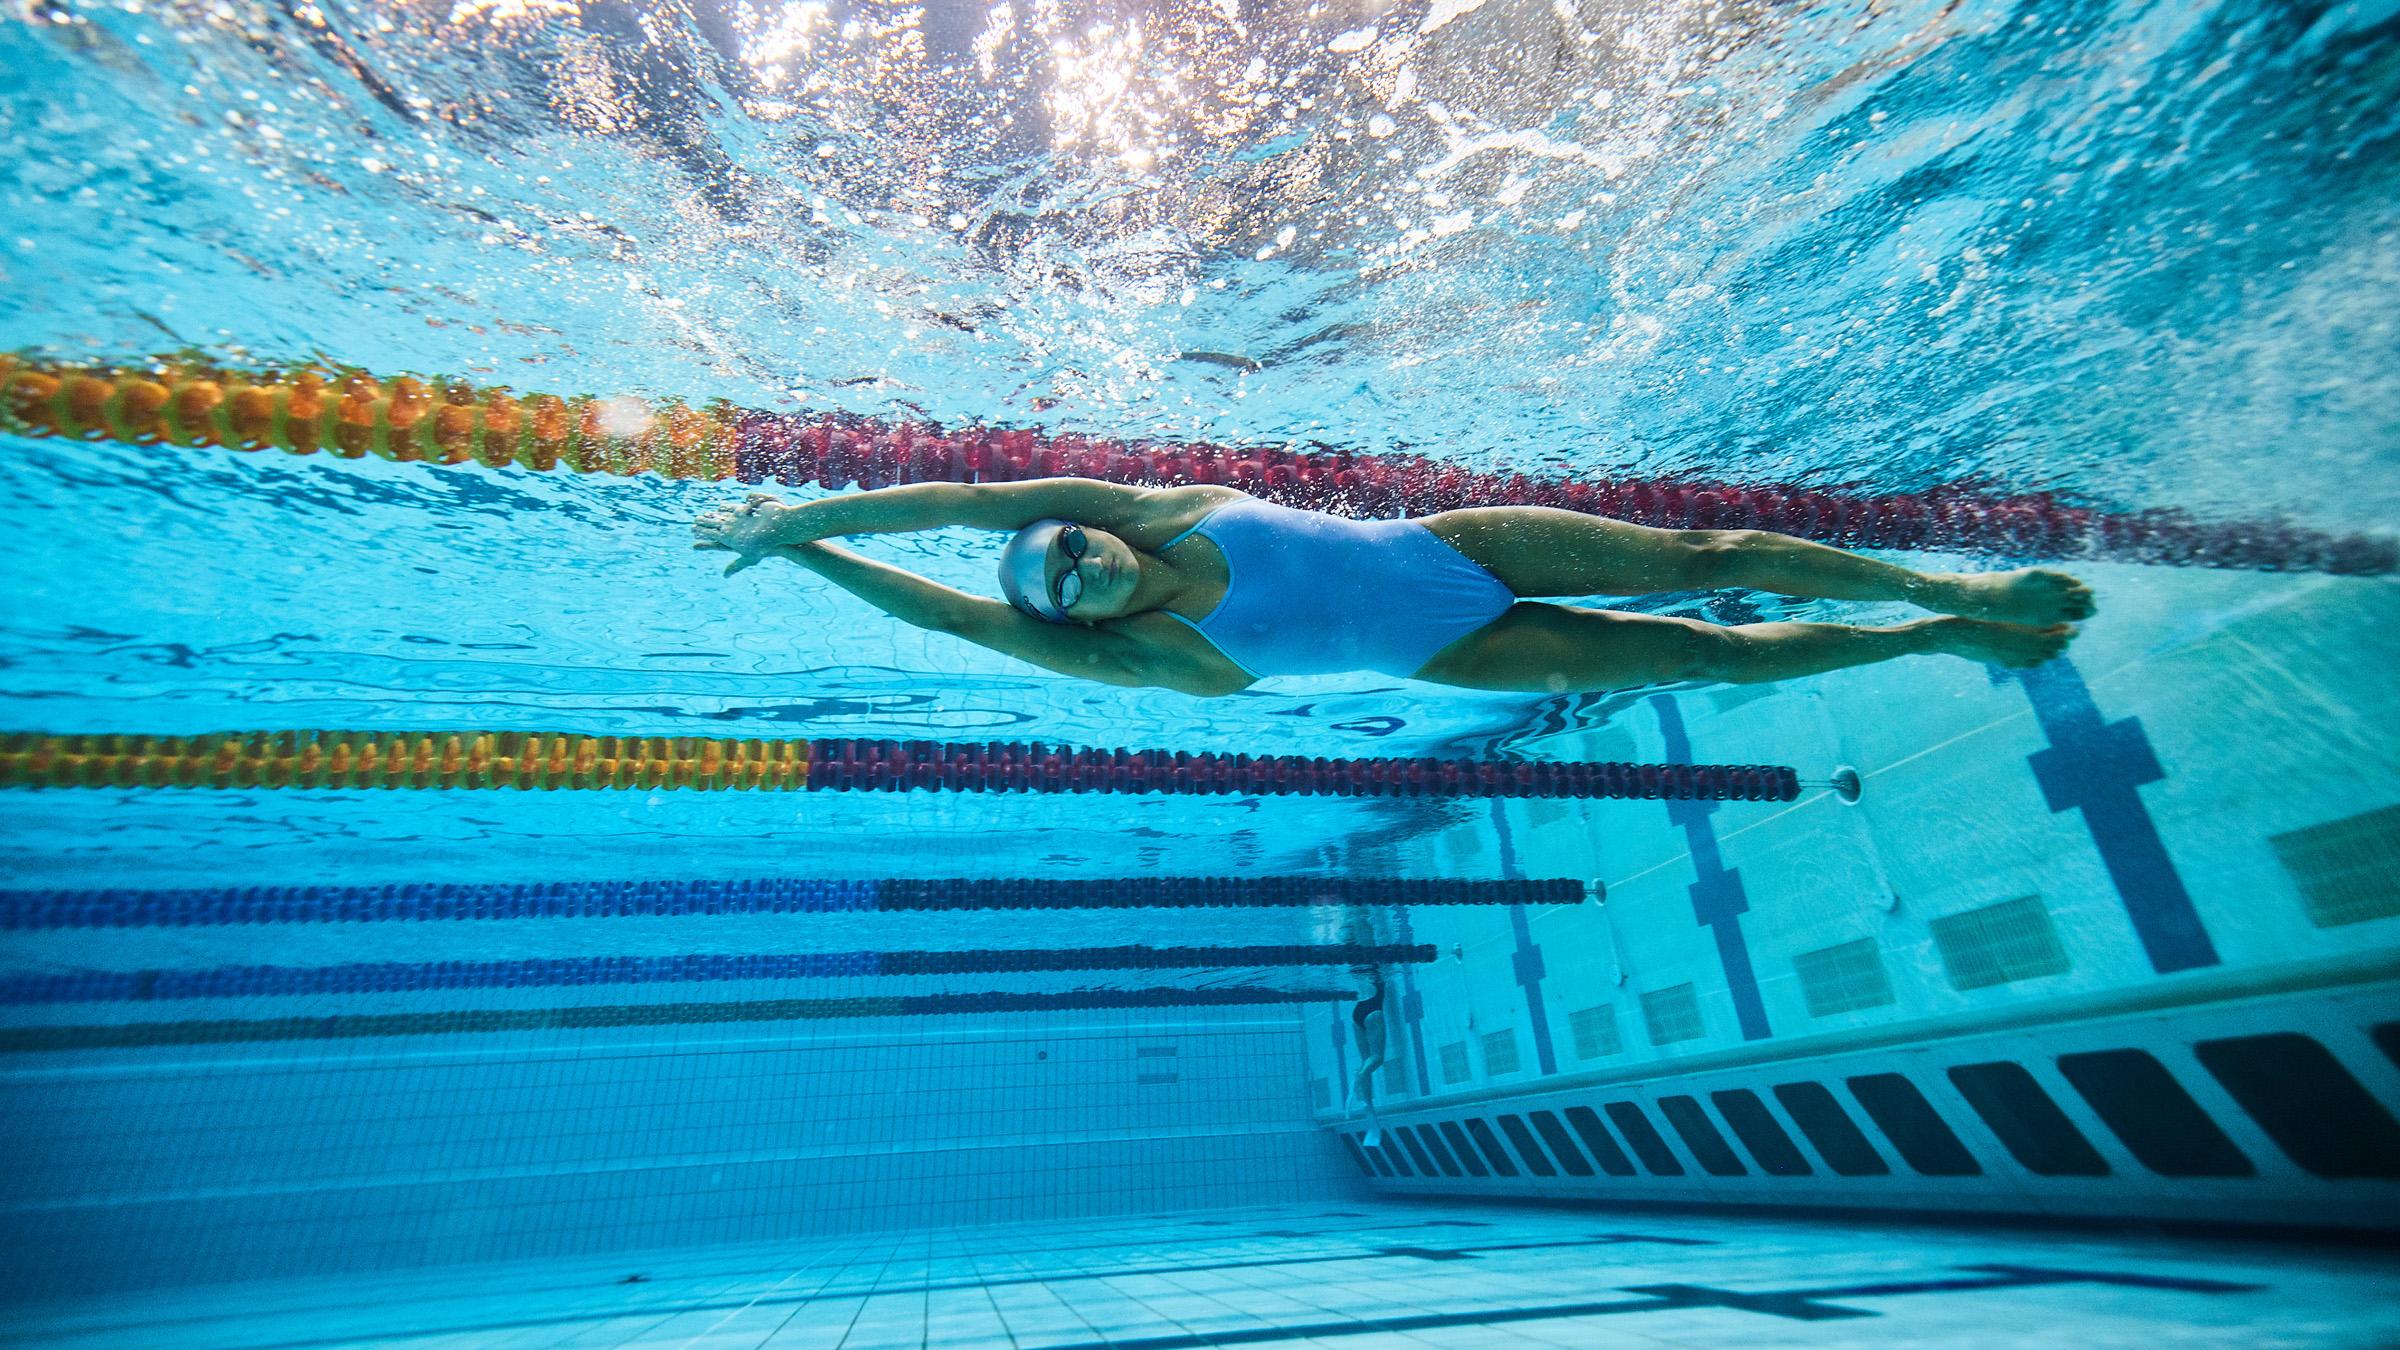 Underwater view of a young athlete, who has just pushed off the pool wall to swim